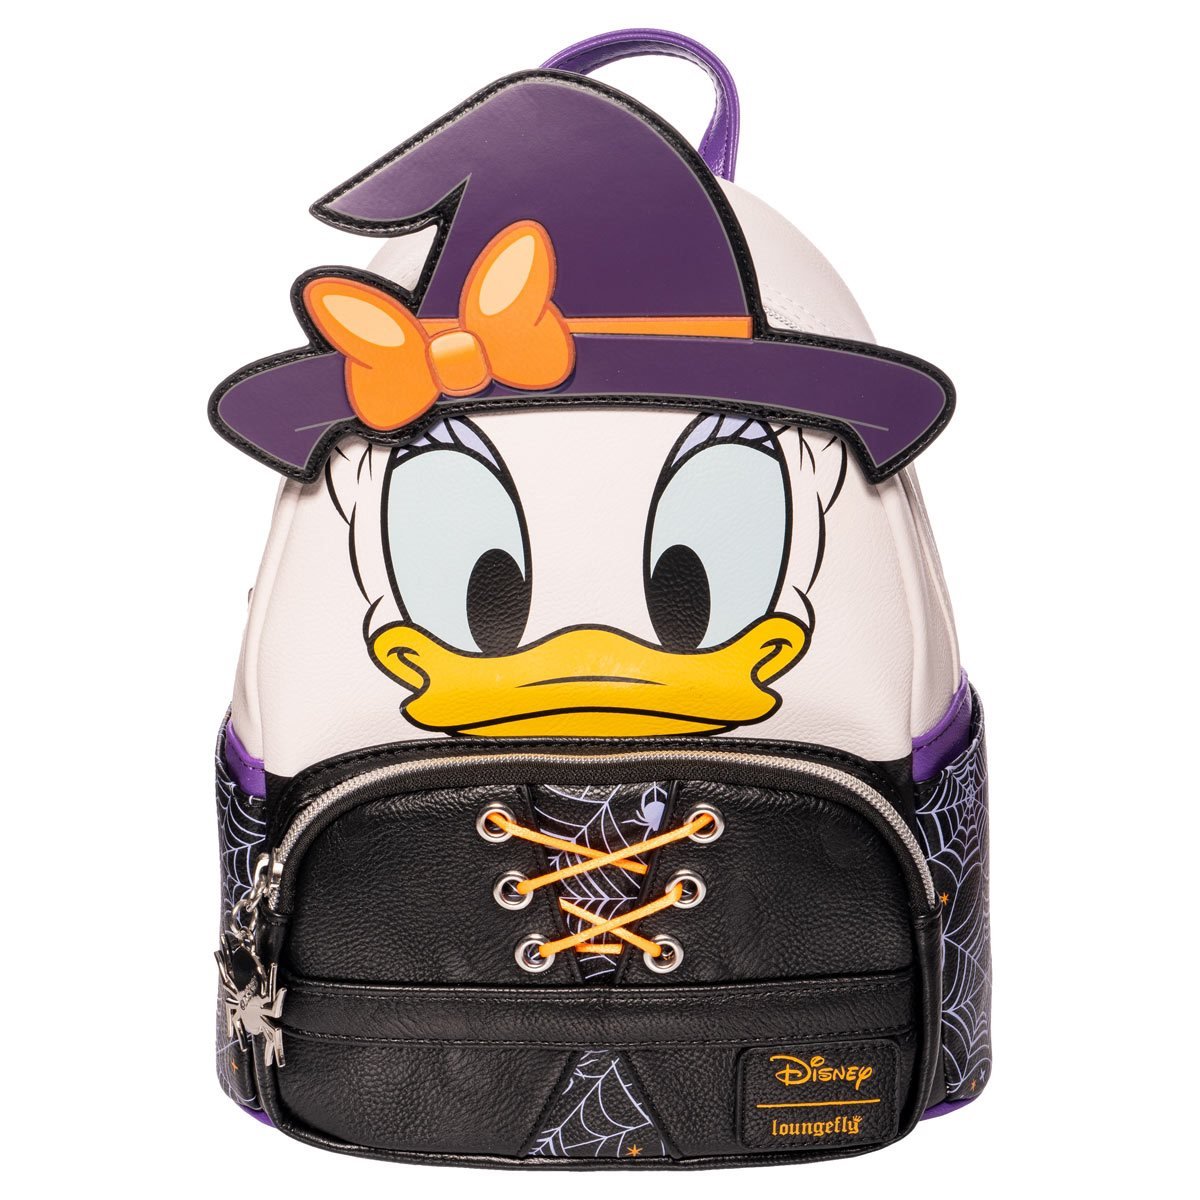 Loungefly Disney Daisy Duck Halloween Witch Mini Backpack - Entertainment Earth Ex - Loungefly mini backpack front